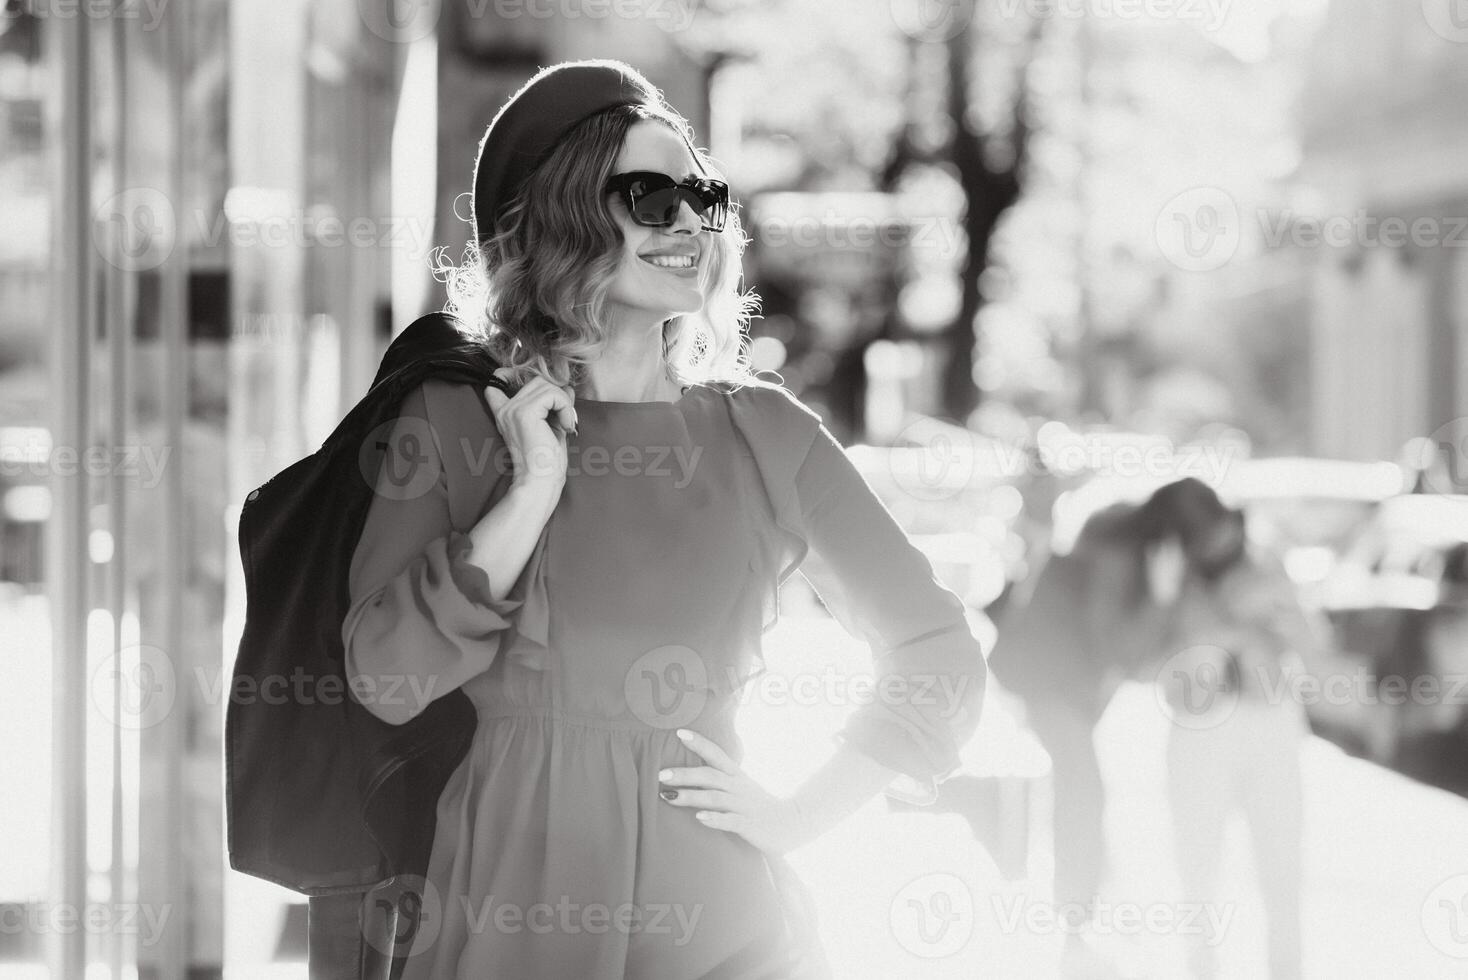 fashion portrait of young beautiful stylish woman walking in city street, style trend, drinking coffee. photo